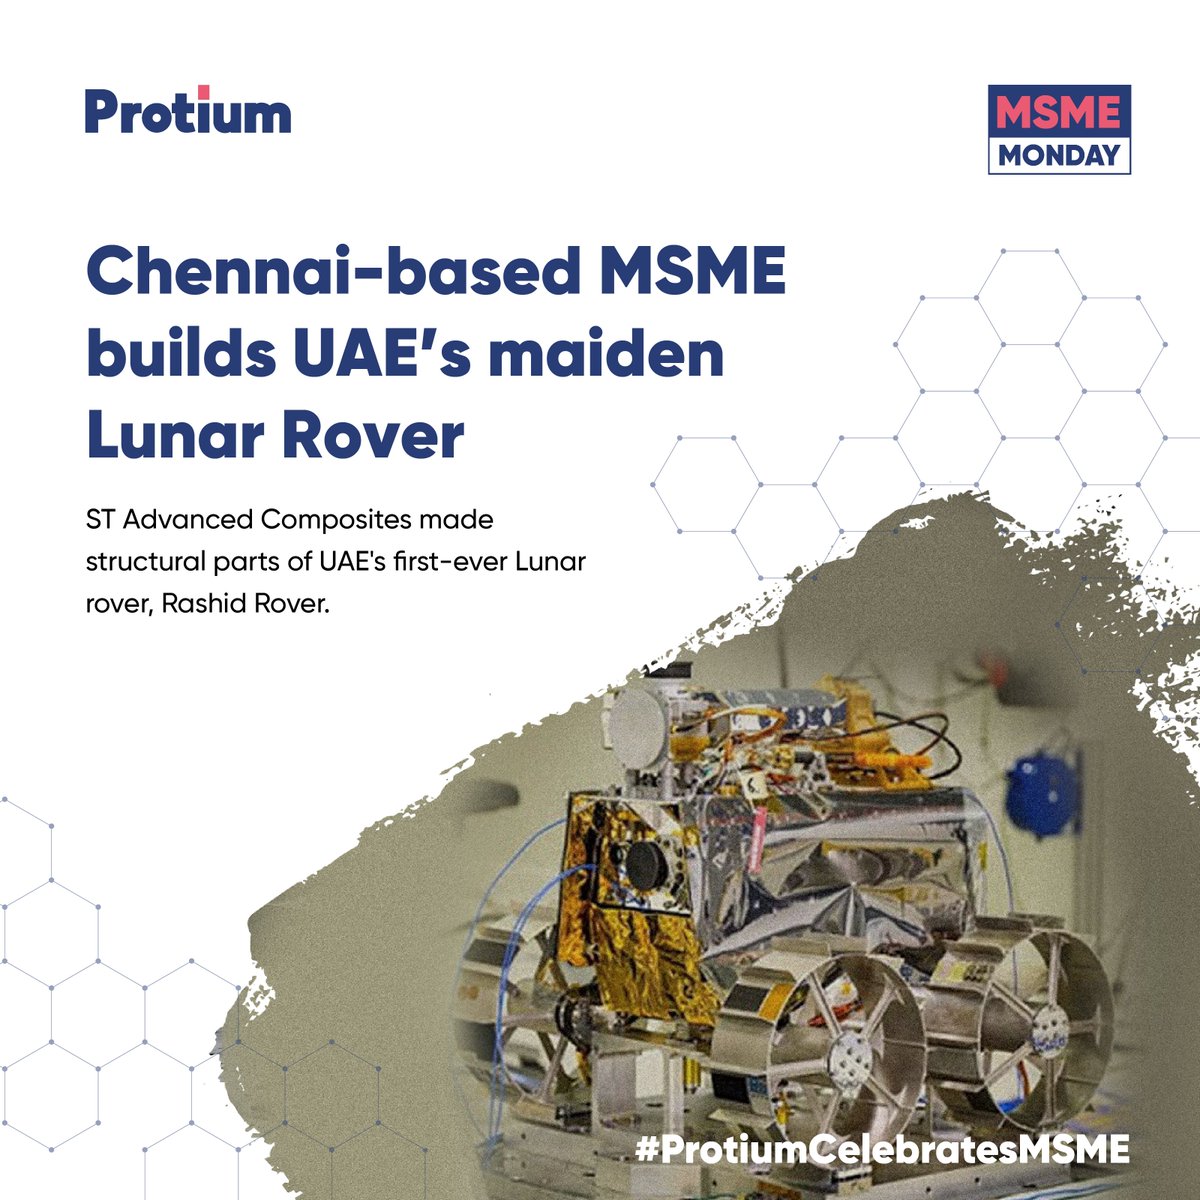 The Chennai-based #MSME St Advanced Composites has manufactured structural parts of UAE's first lunar rover, #Rashid.
A proud moment for #IndianMSMEs 

#Protium #FuelingAmbition #ProtiumCelebratesMSME #MSMEMonday
#IndianMSME #LunarRover #UAE #NASA